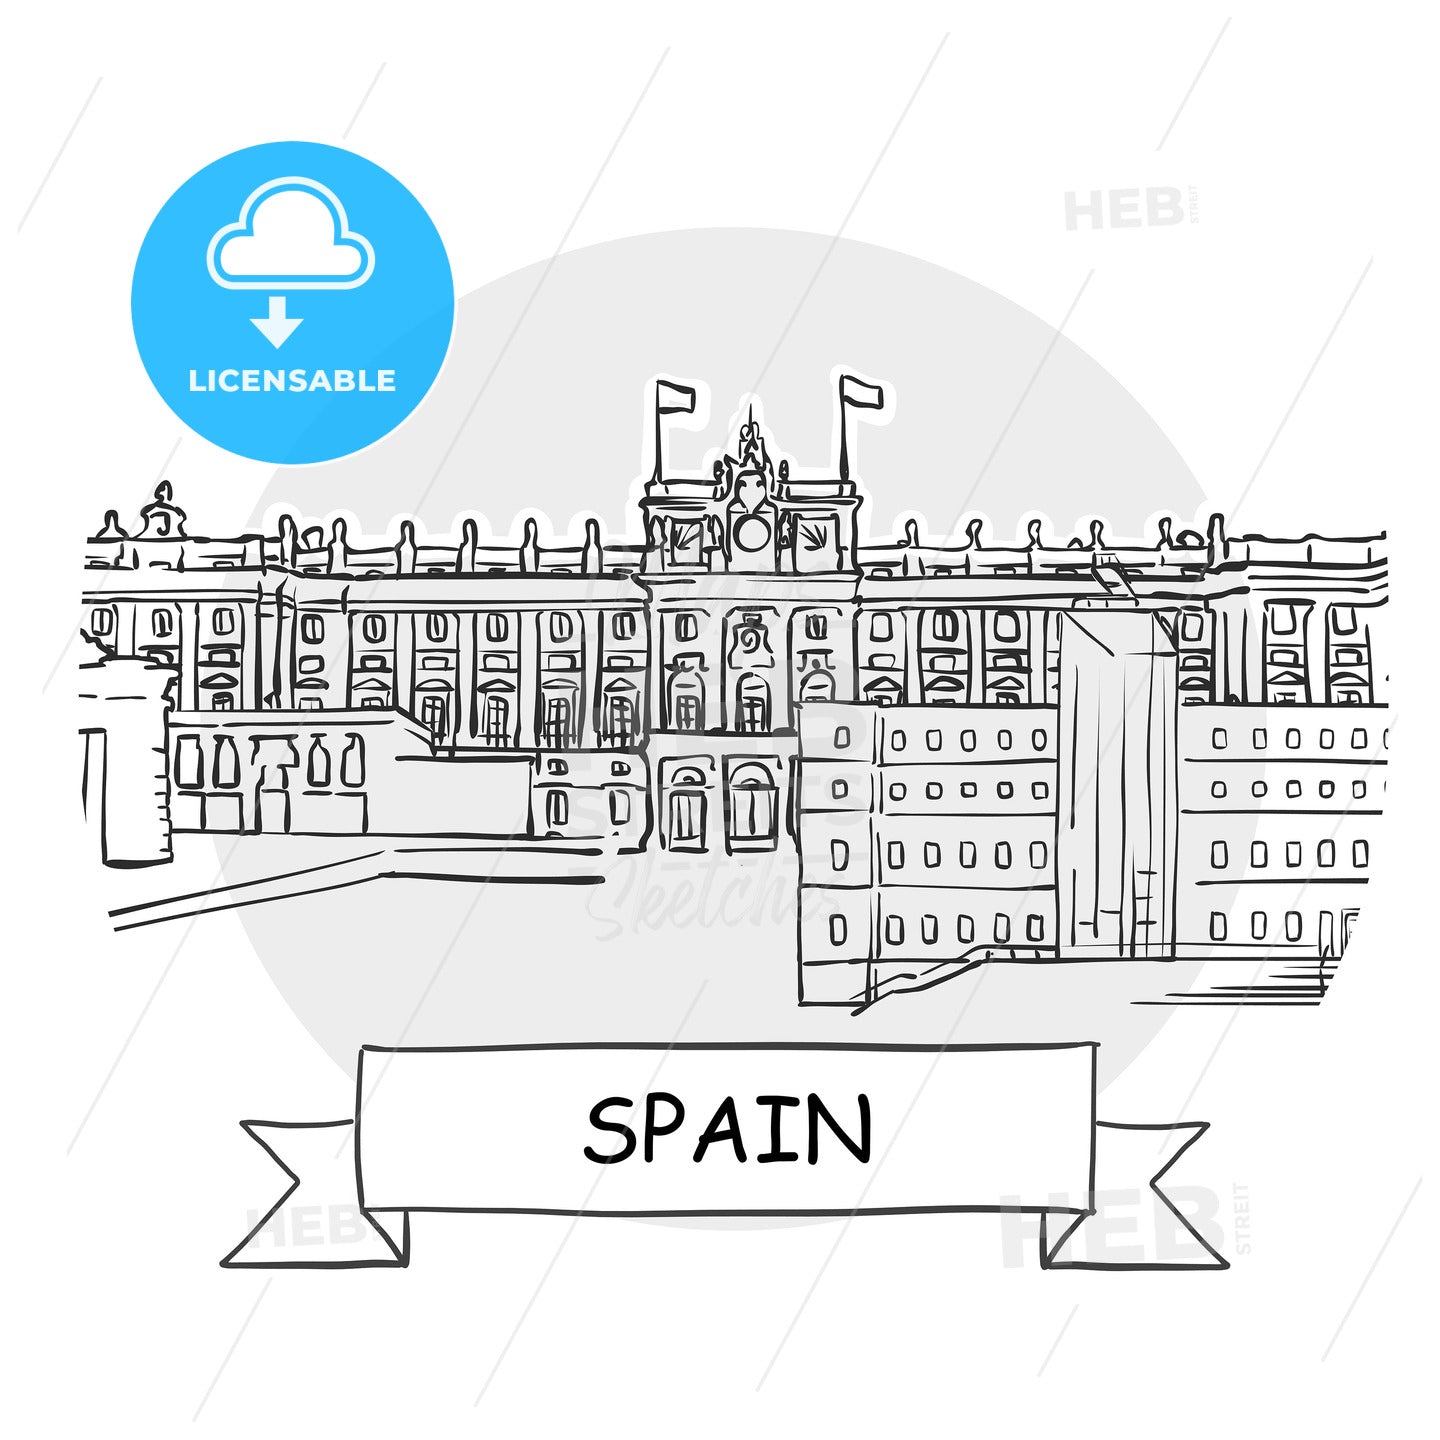 Spain hand-drawn urban vector sign – instant download